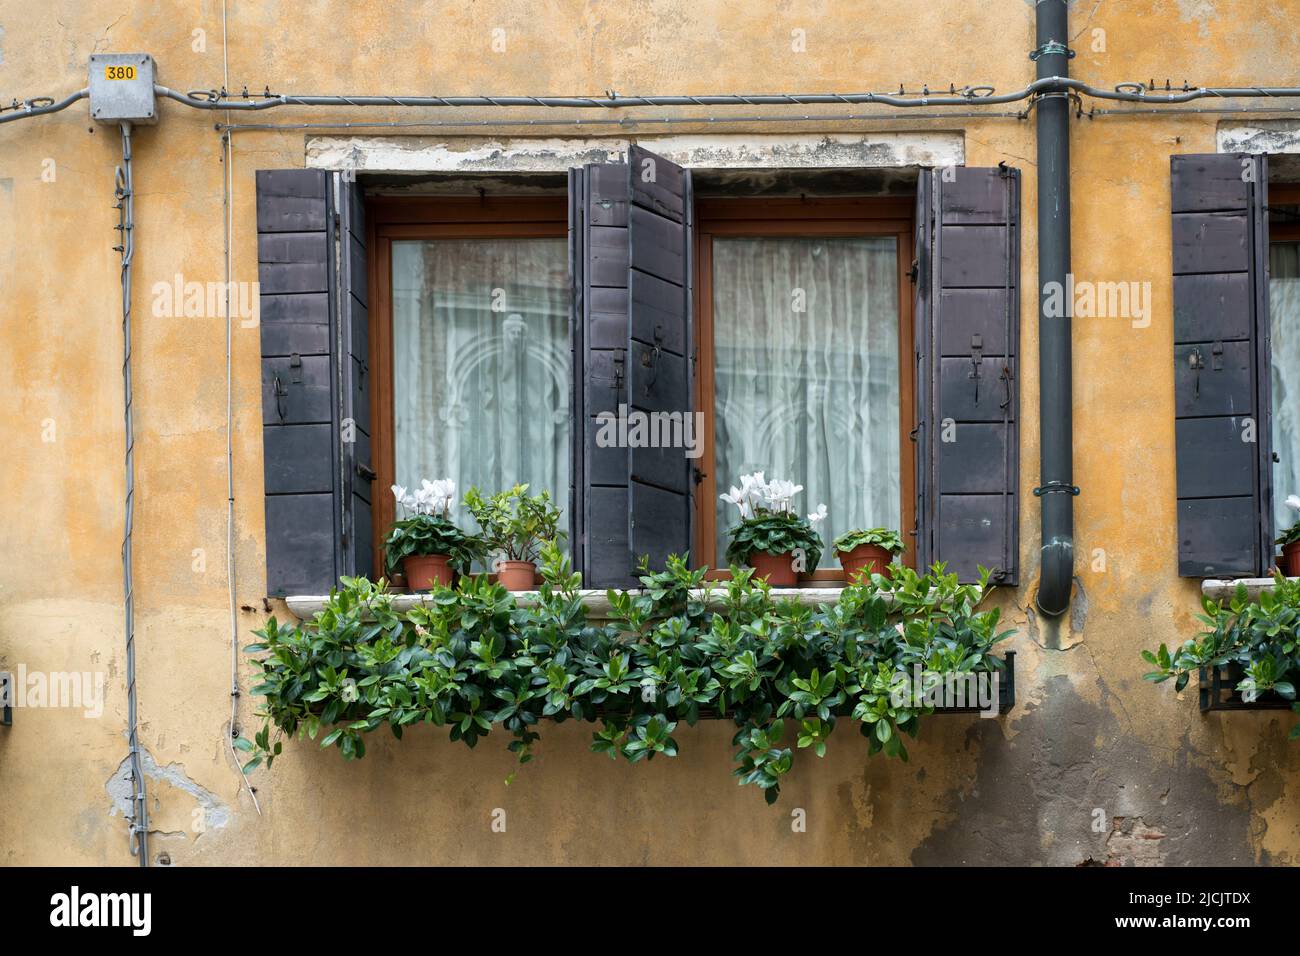 ancient building wall with two windows and blossom flowers in pots Stock Photo